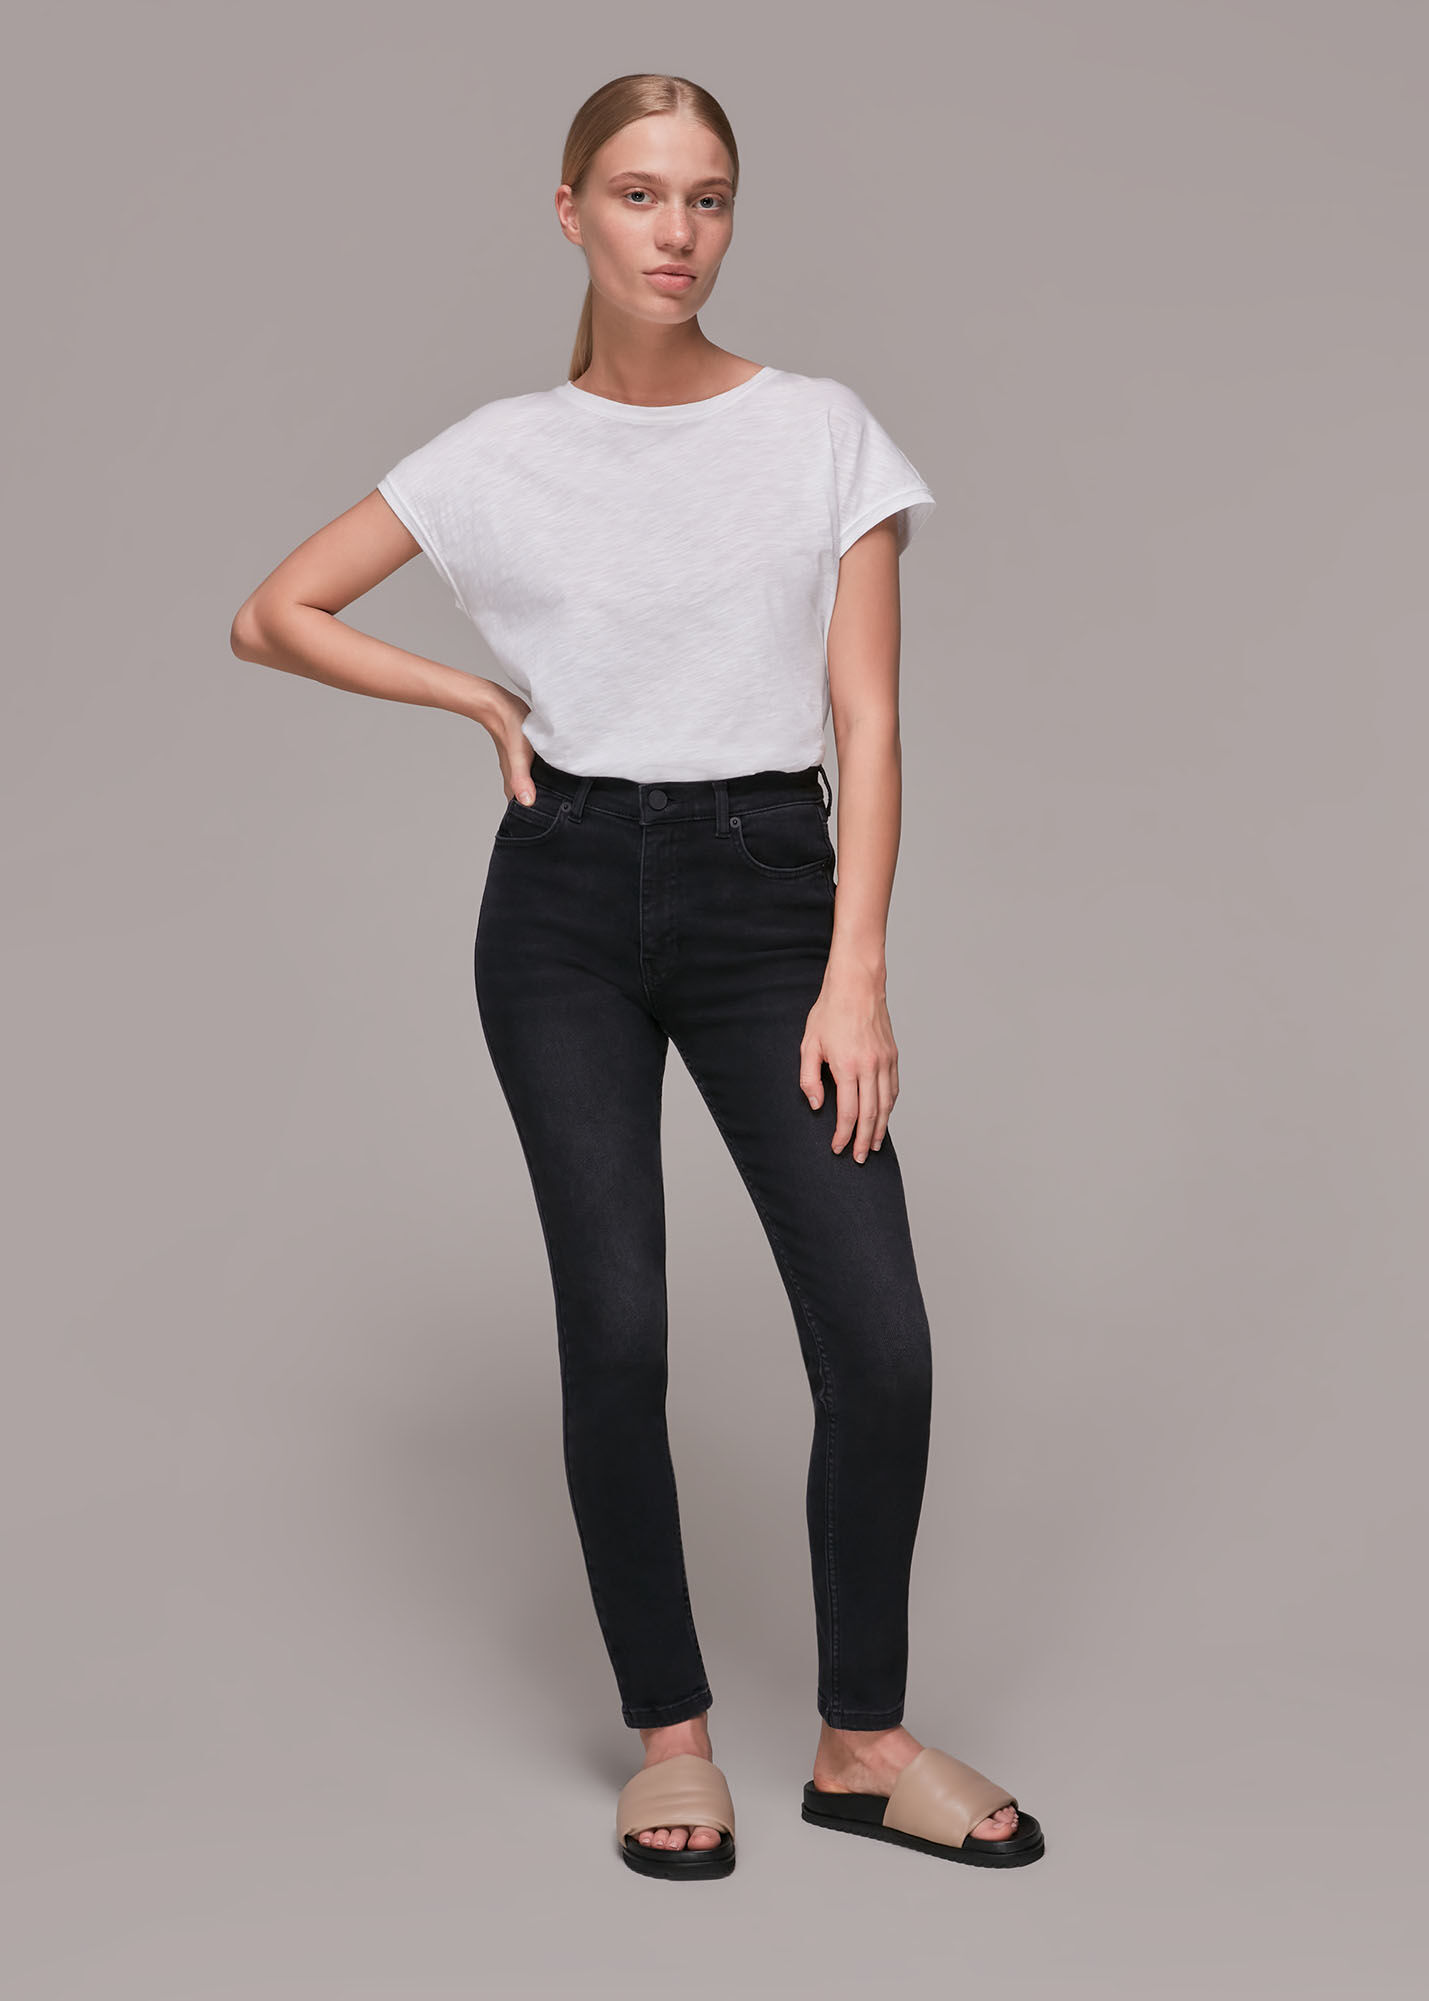 Black Mid-Rise Stretchy Skinny Jeans | Whistles |